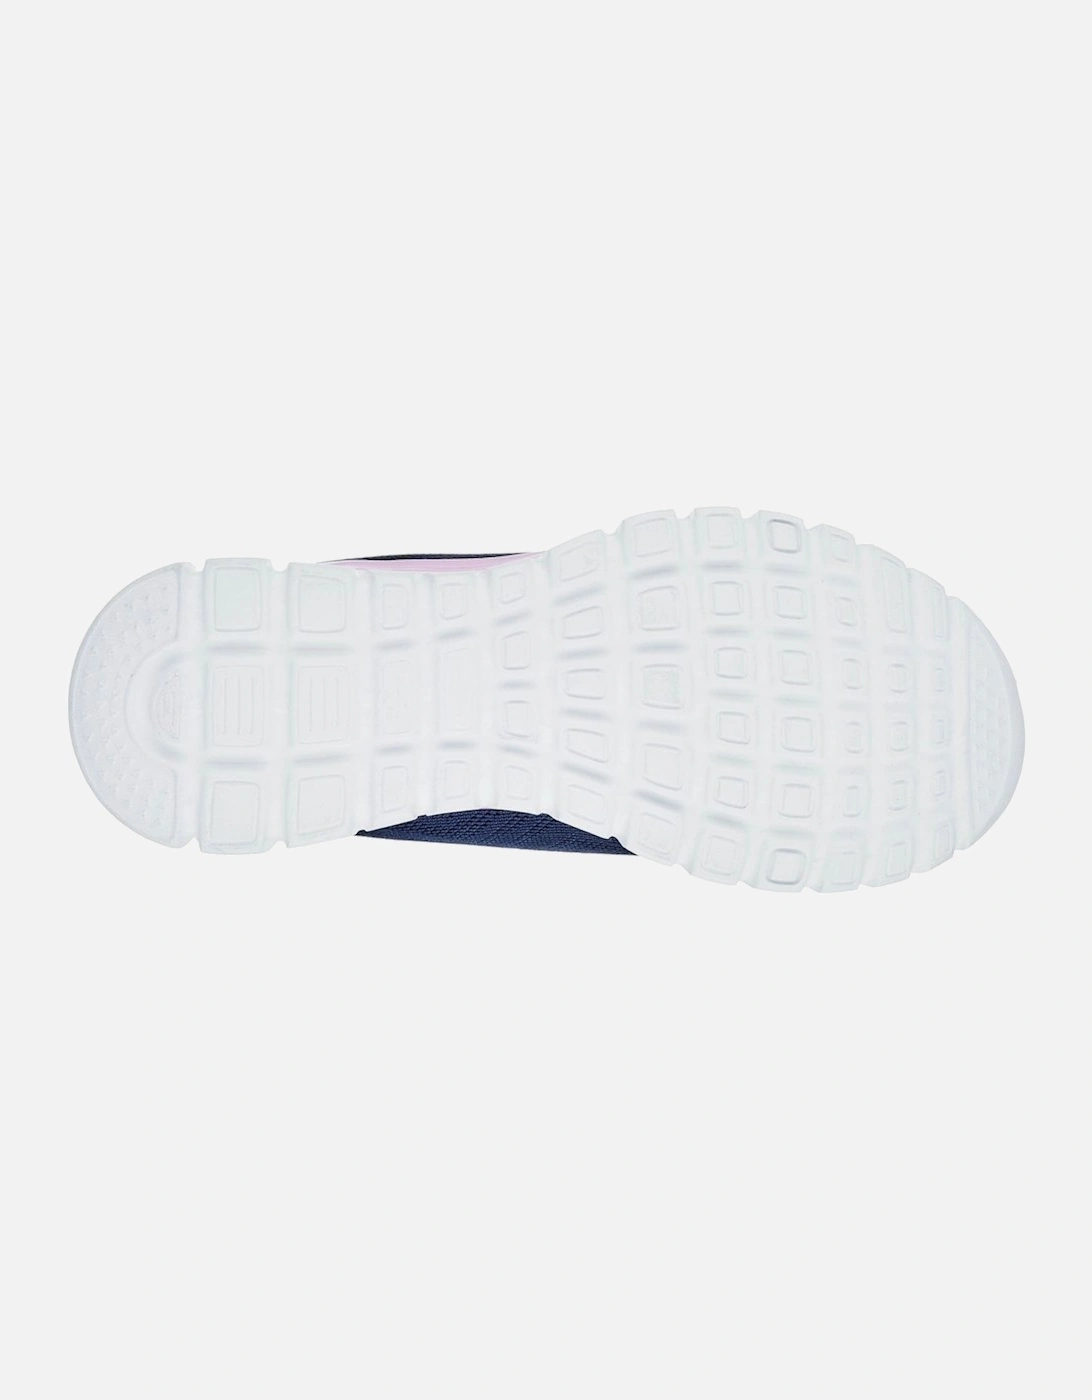 Graceful Get Connected Womens Trainers